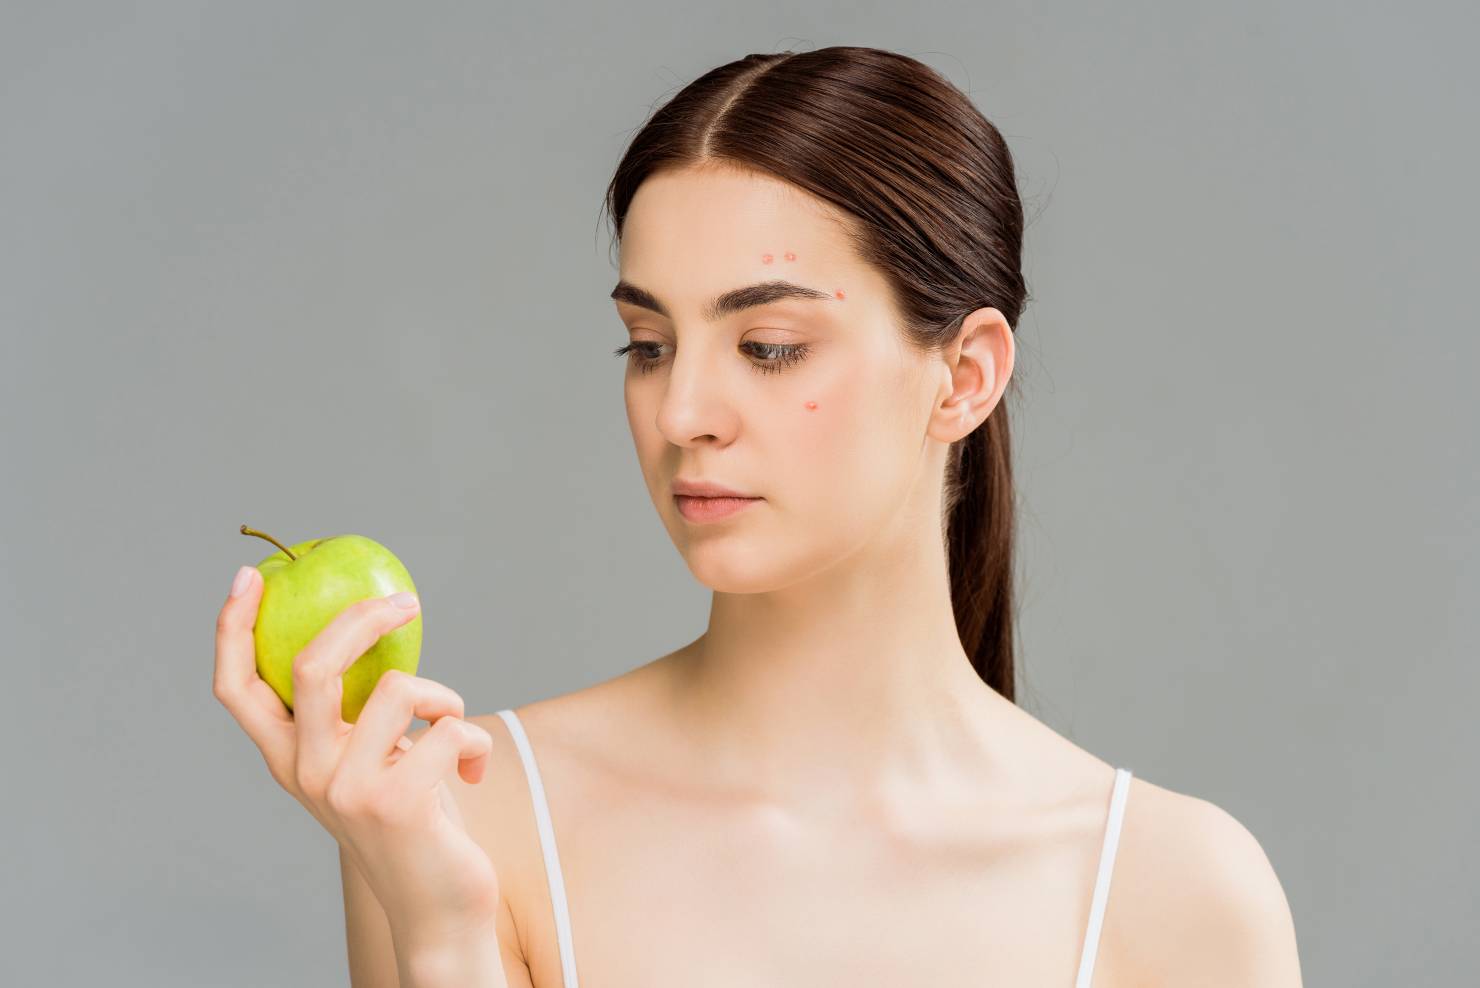 woman with acne looking at an apple she's holding